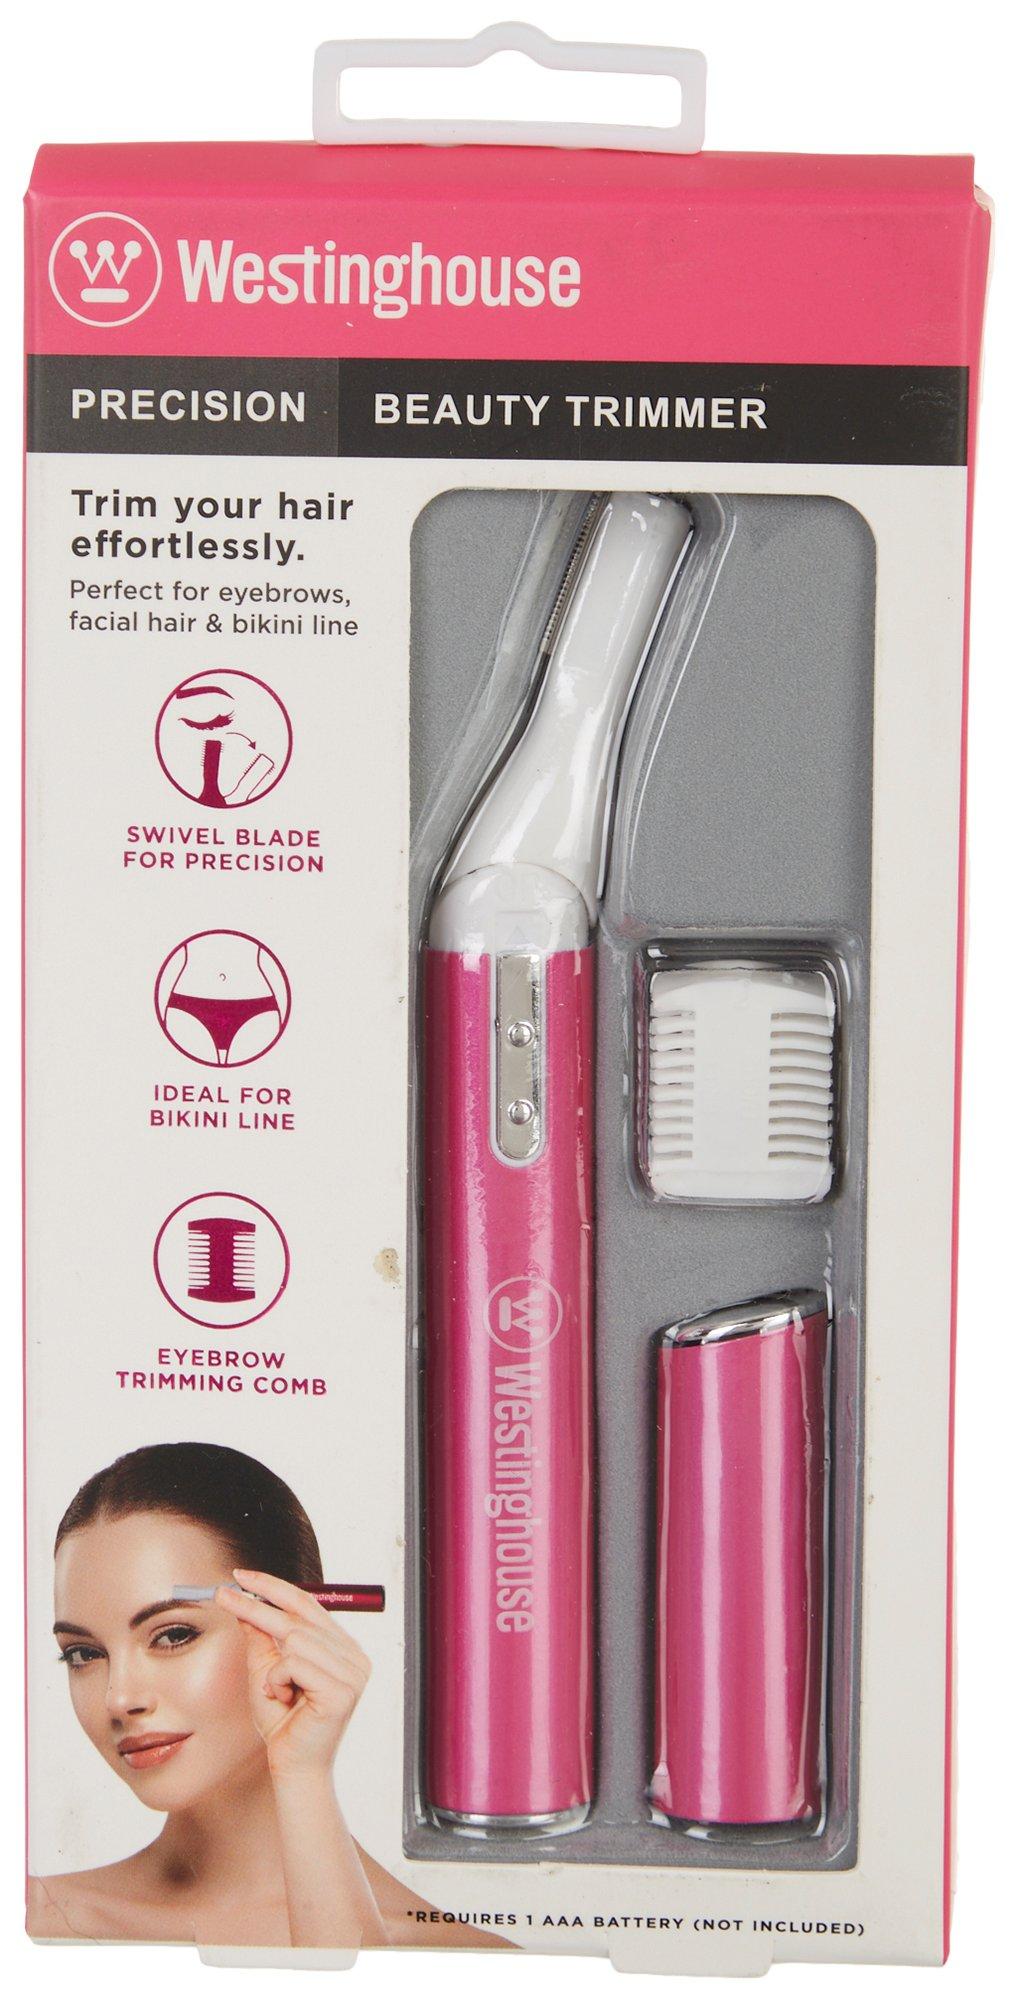 Precision Beauty Trimmer